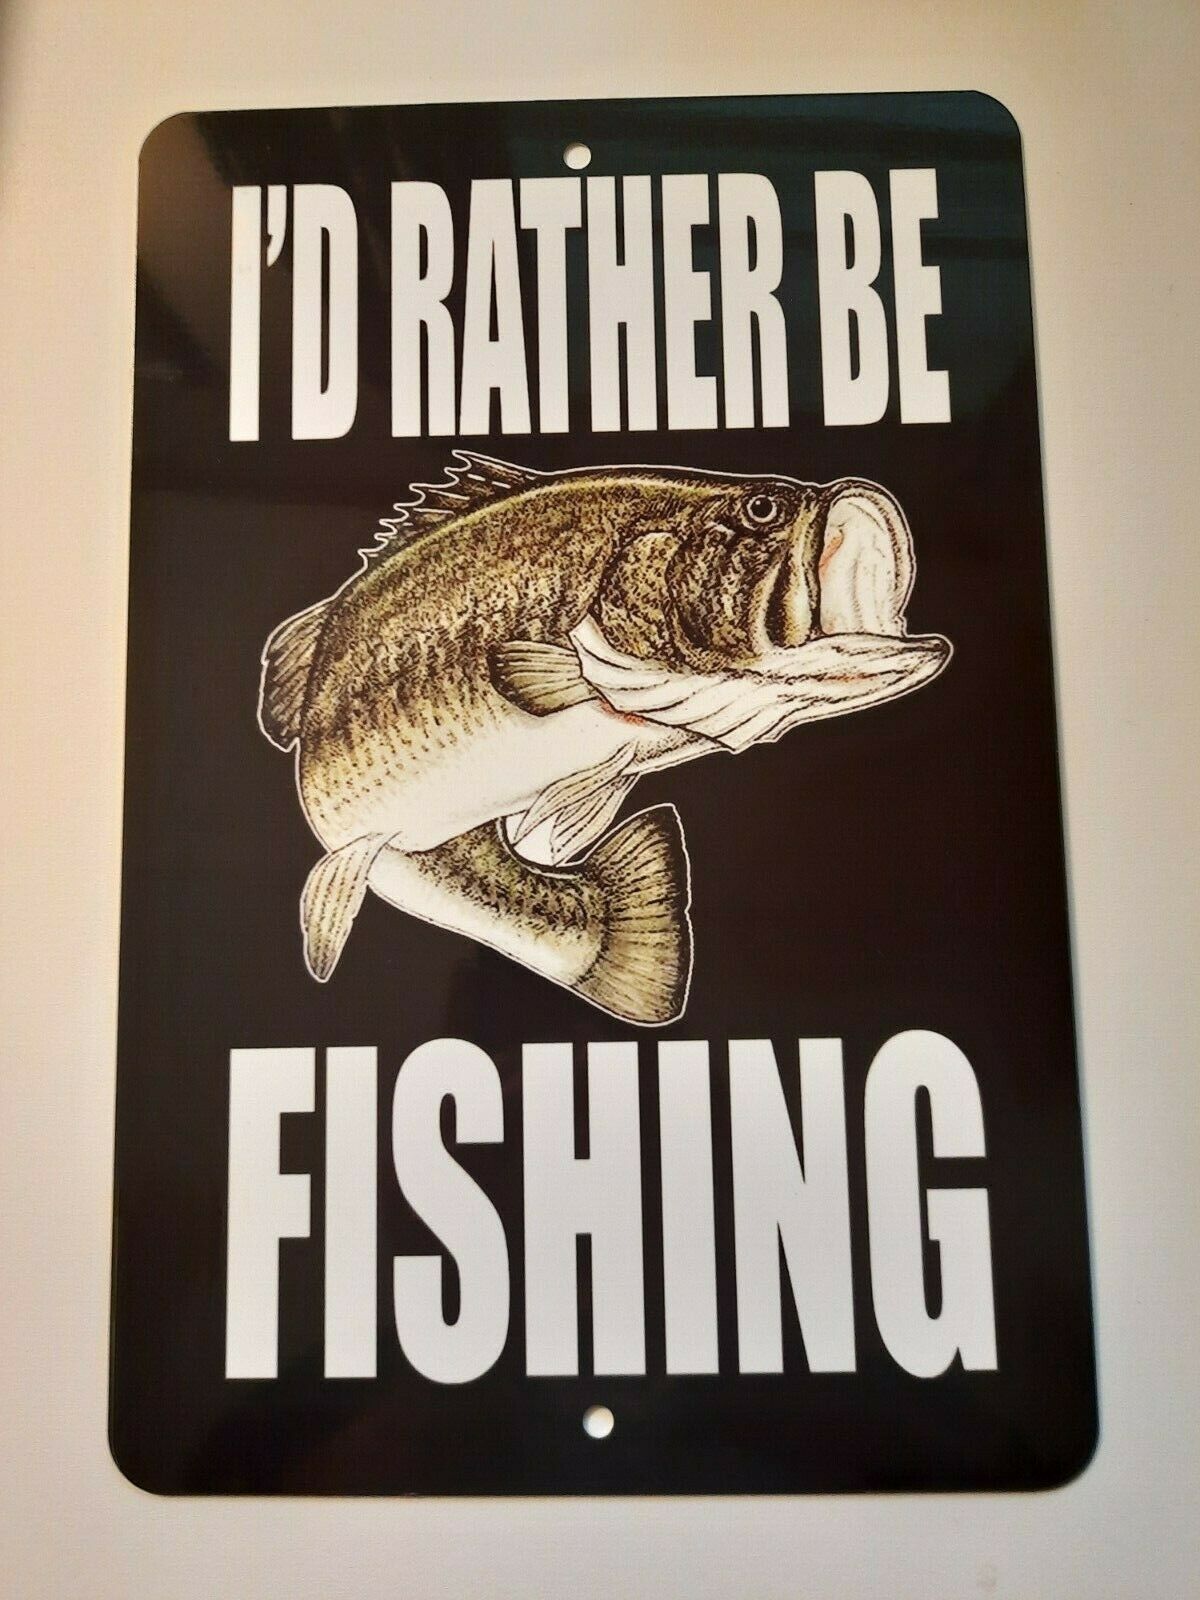 Id Rather Be Fishing 8x12 Metal Wall Sign Man Cave Garage Poster